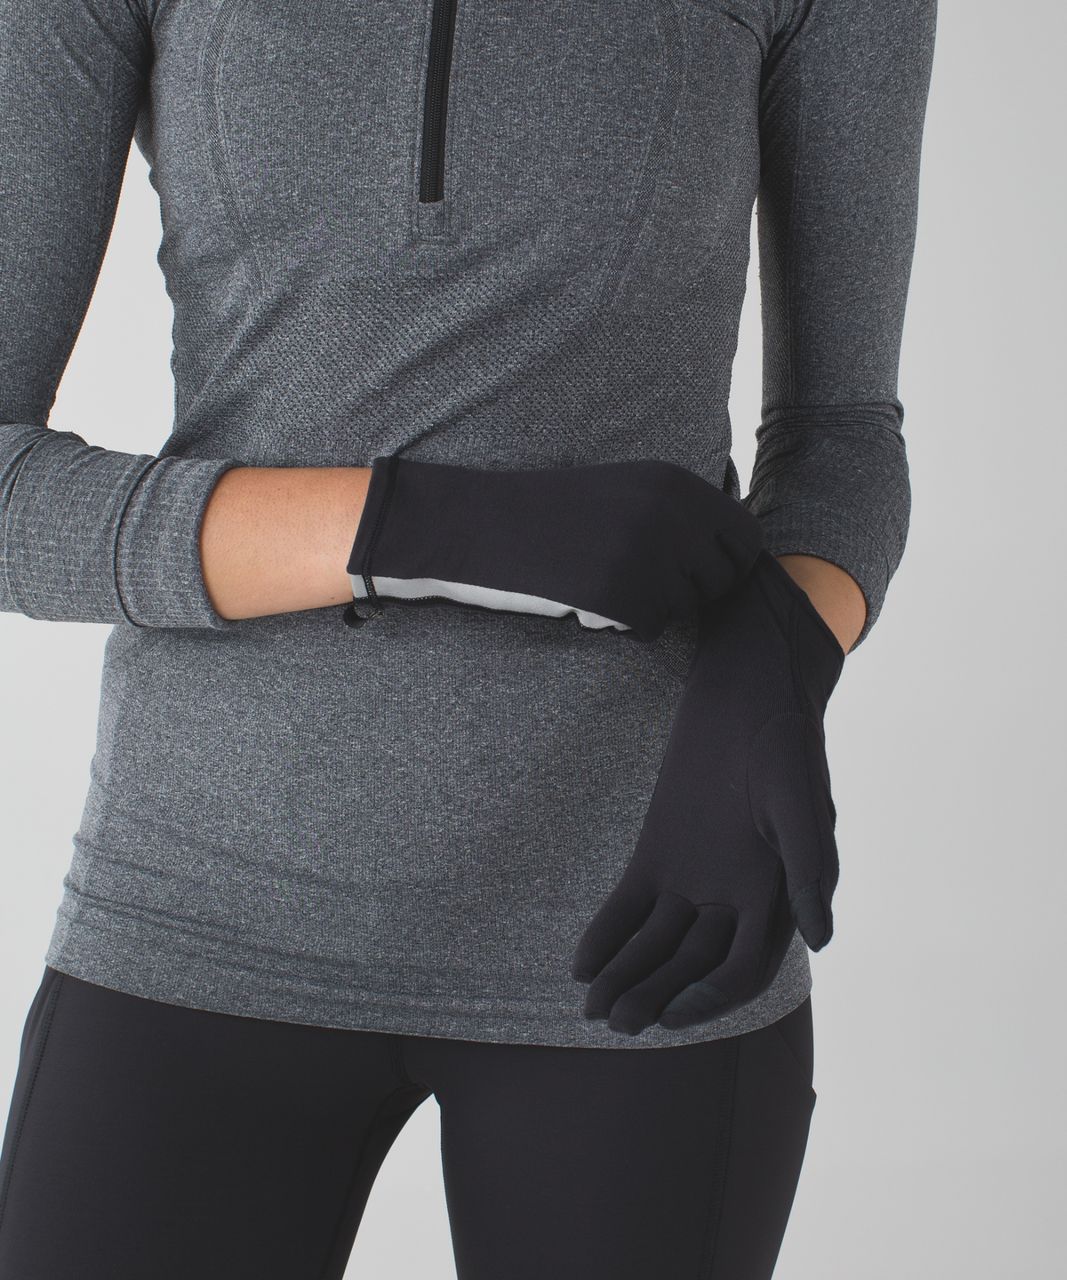 Lululemon Run With Me Gloves - Black (Second Release)